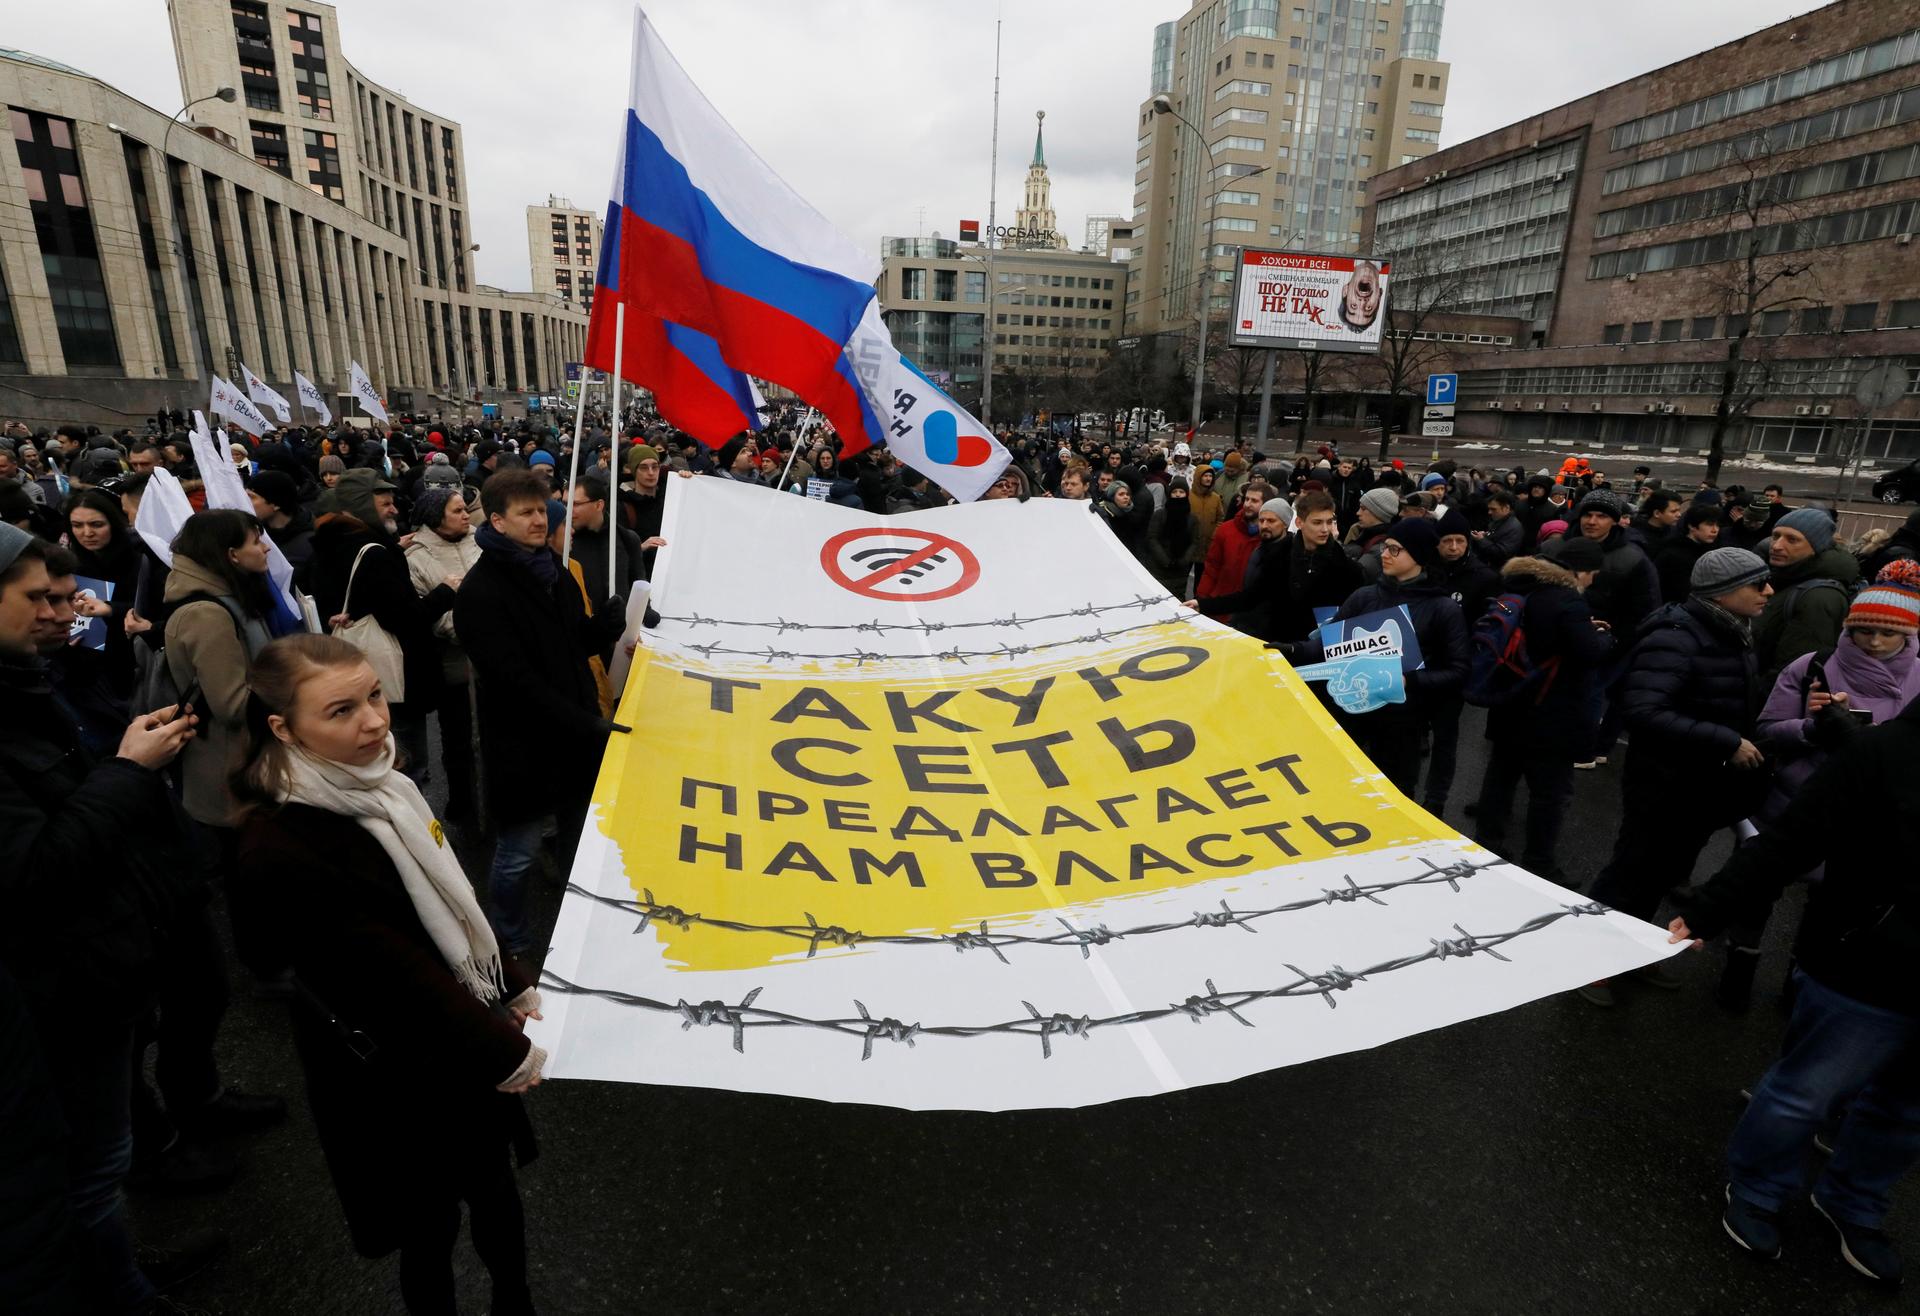 Protesters wa;l through the streets of a city carrying Russian flags and large signs written in Russian.